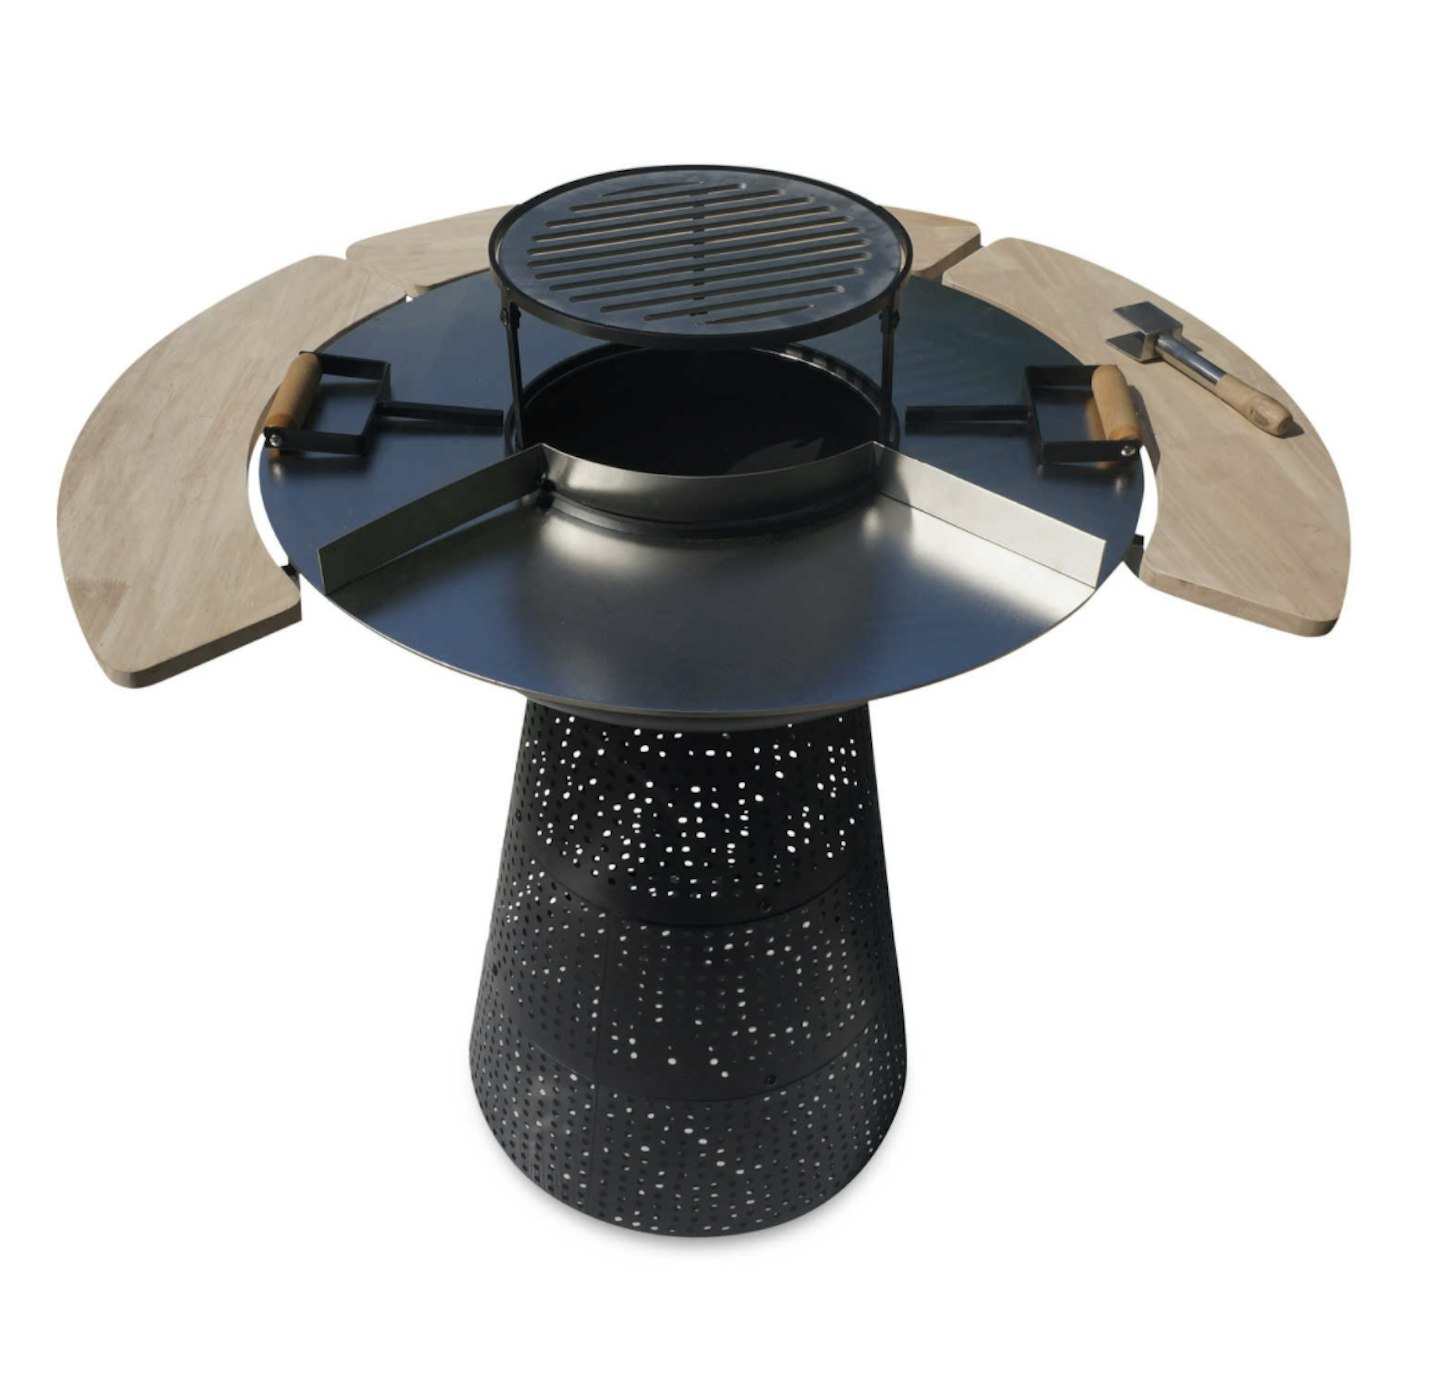 Gardenline 2 in 1 Grill and Fire Pit